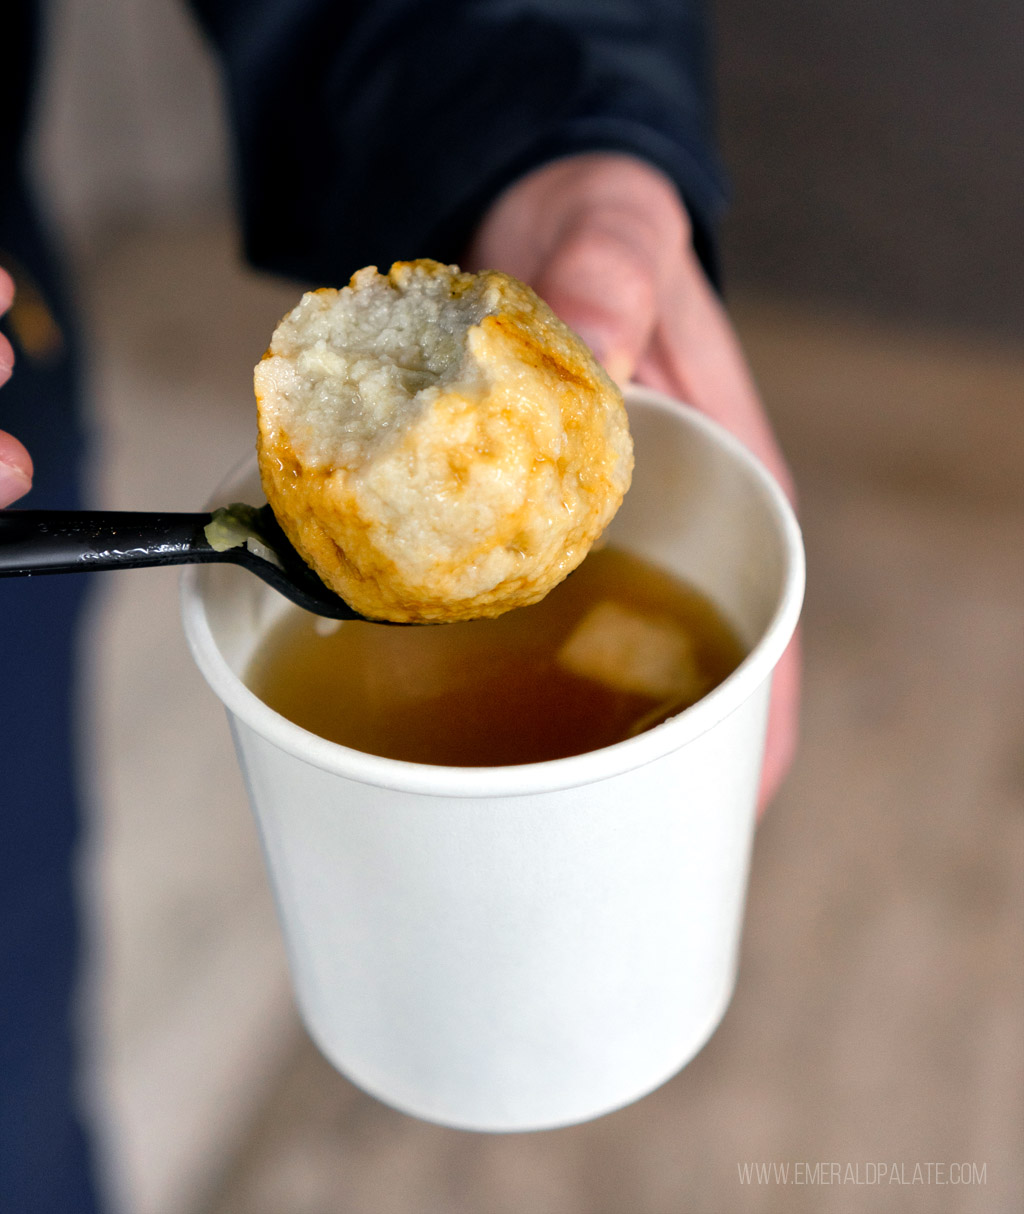 person picking up matzo ball that's been bitten with spoon